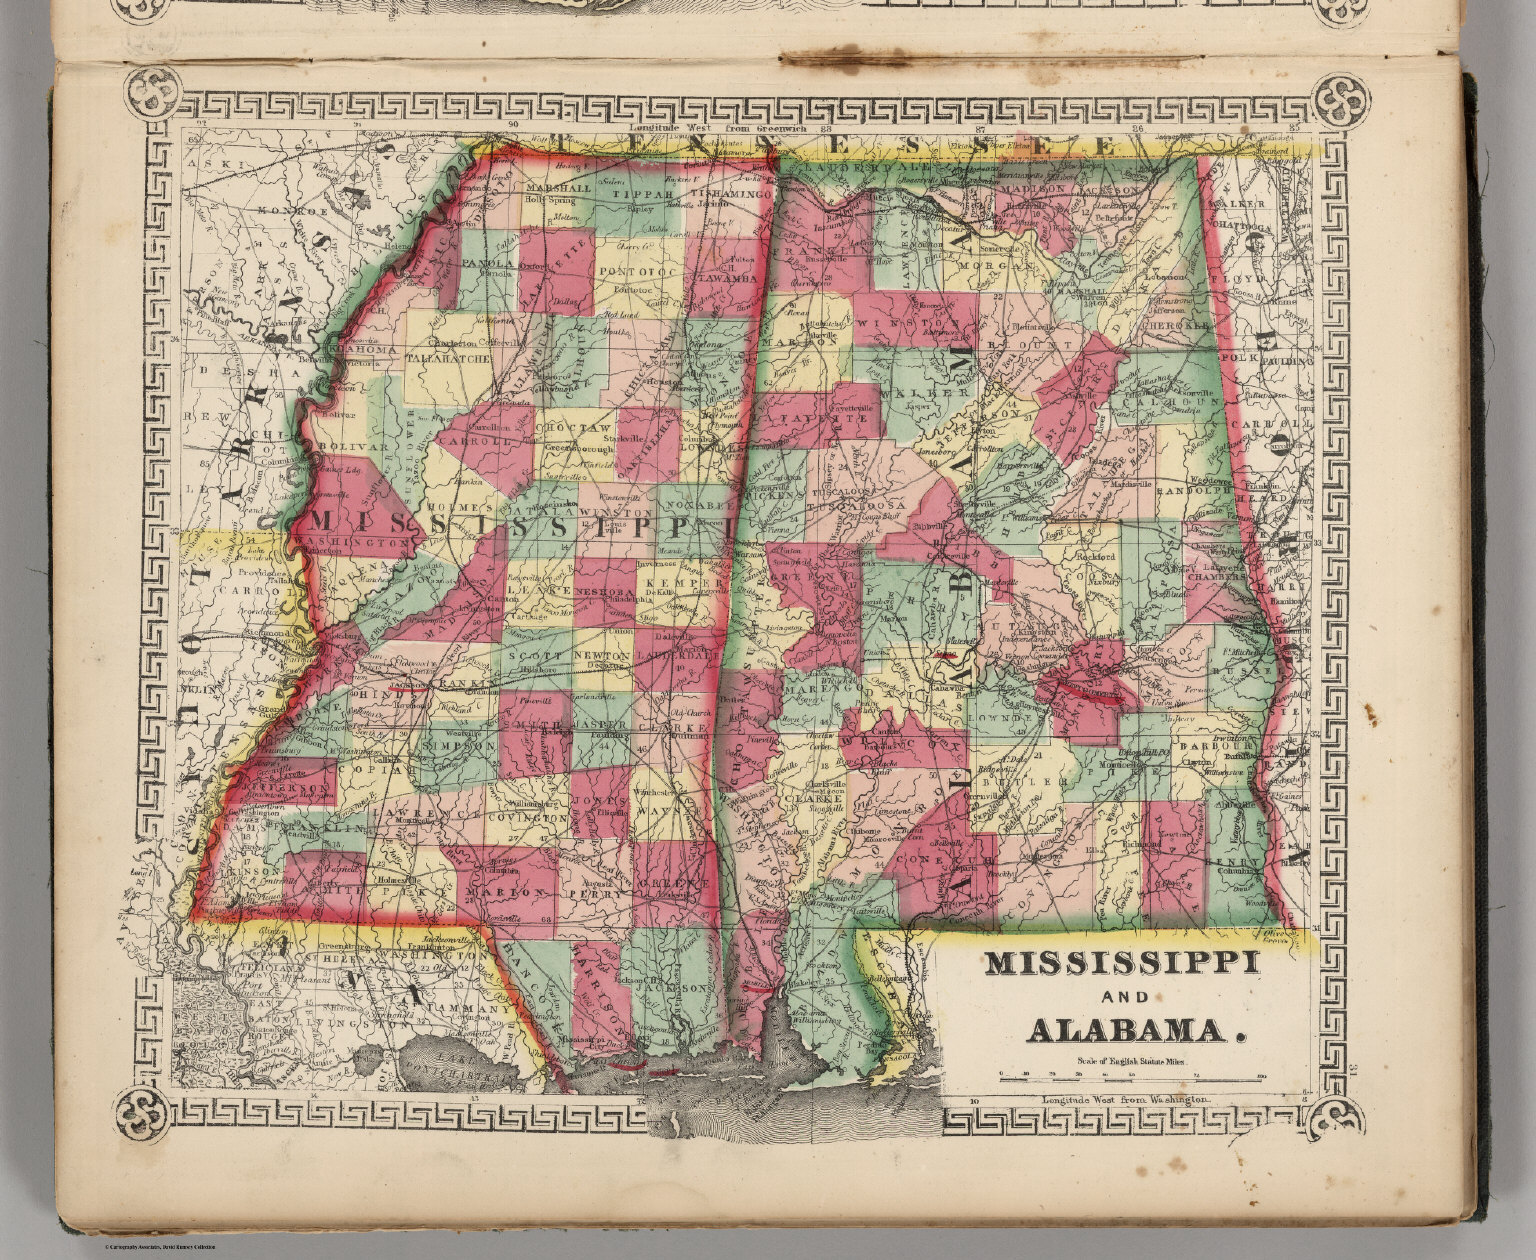 map of alabama and mississippi Mississippi And Alabama David Rumsey Historical Map Collection map of alabama and mississippi